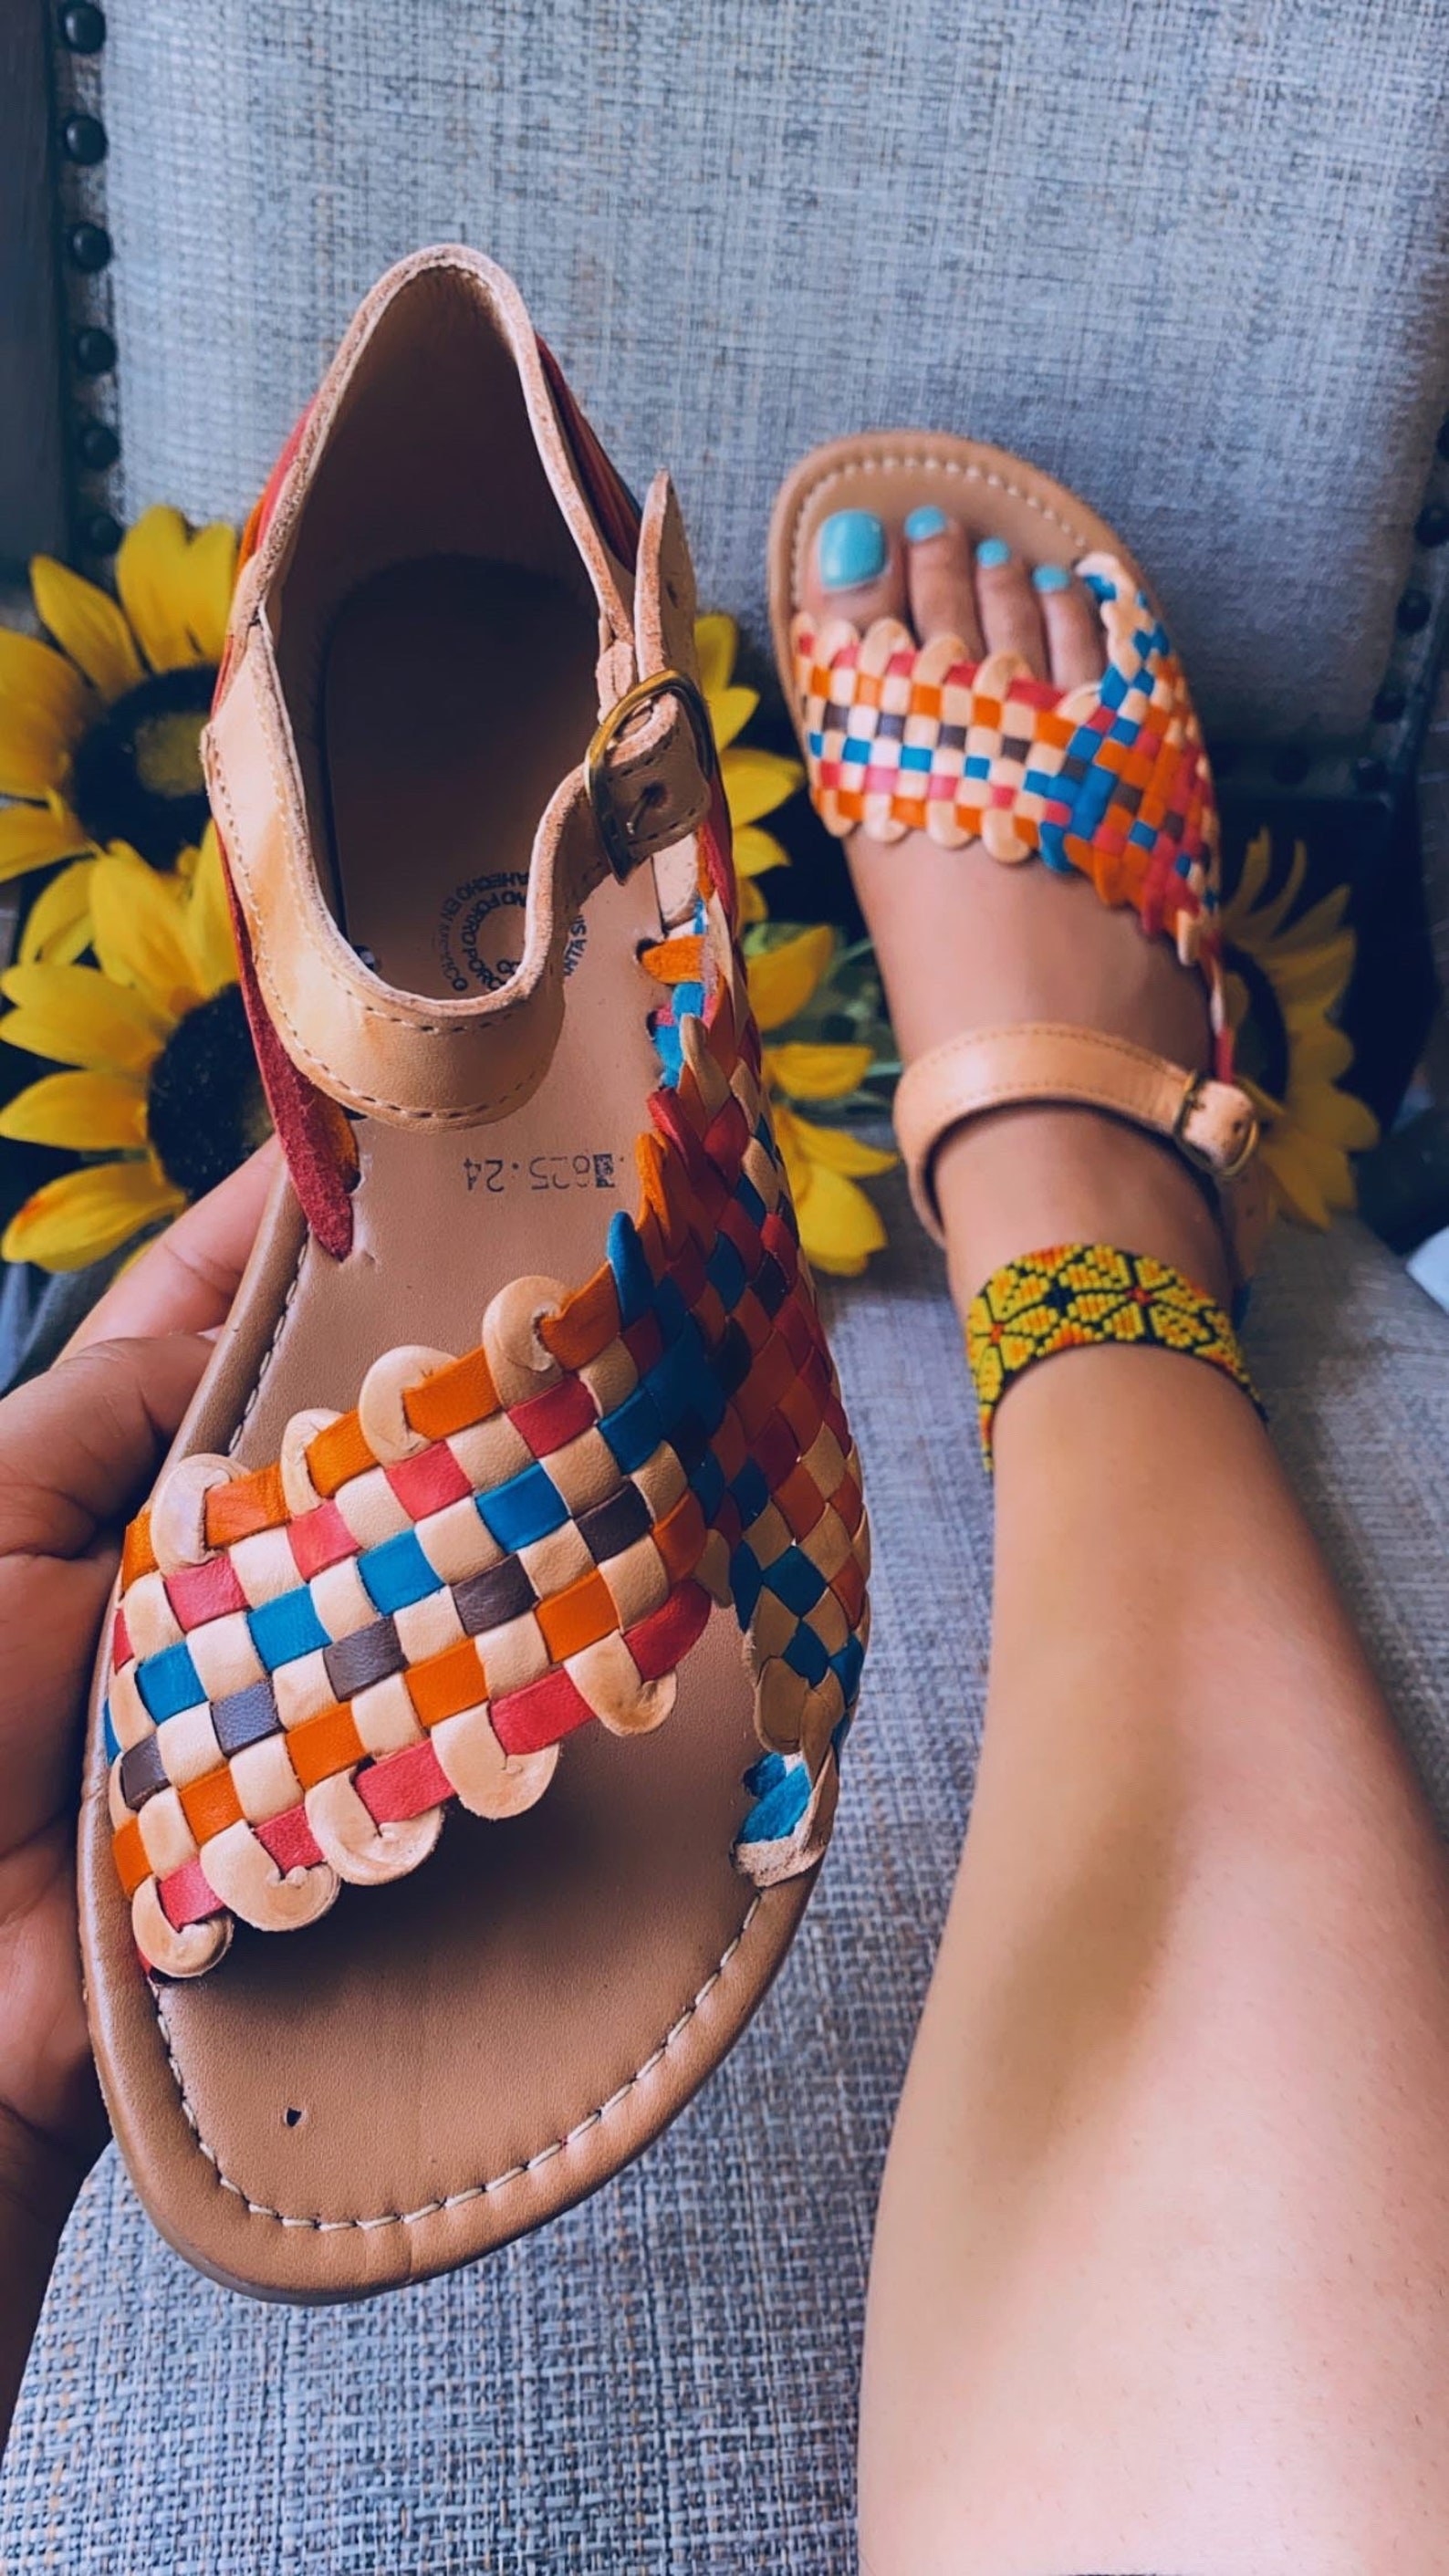 Model wearing rainbow checkerboard sandals with tan leather sole and straps